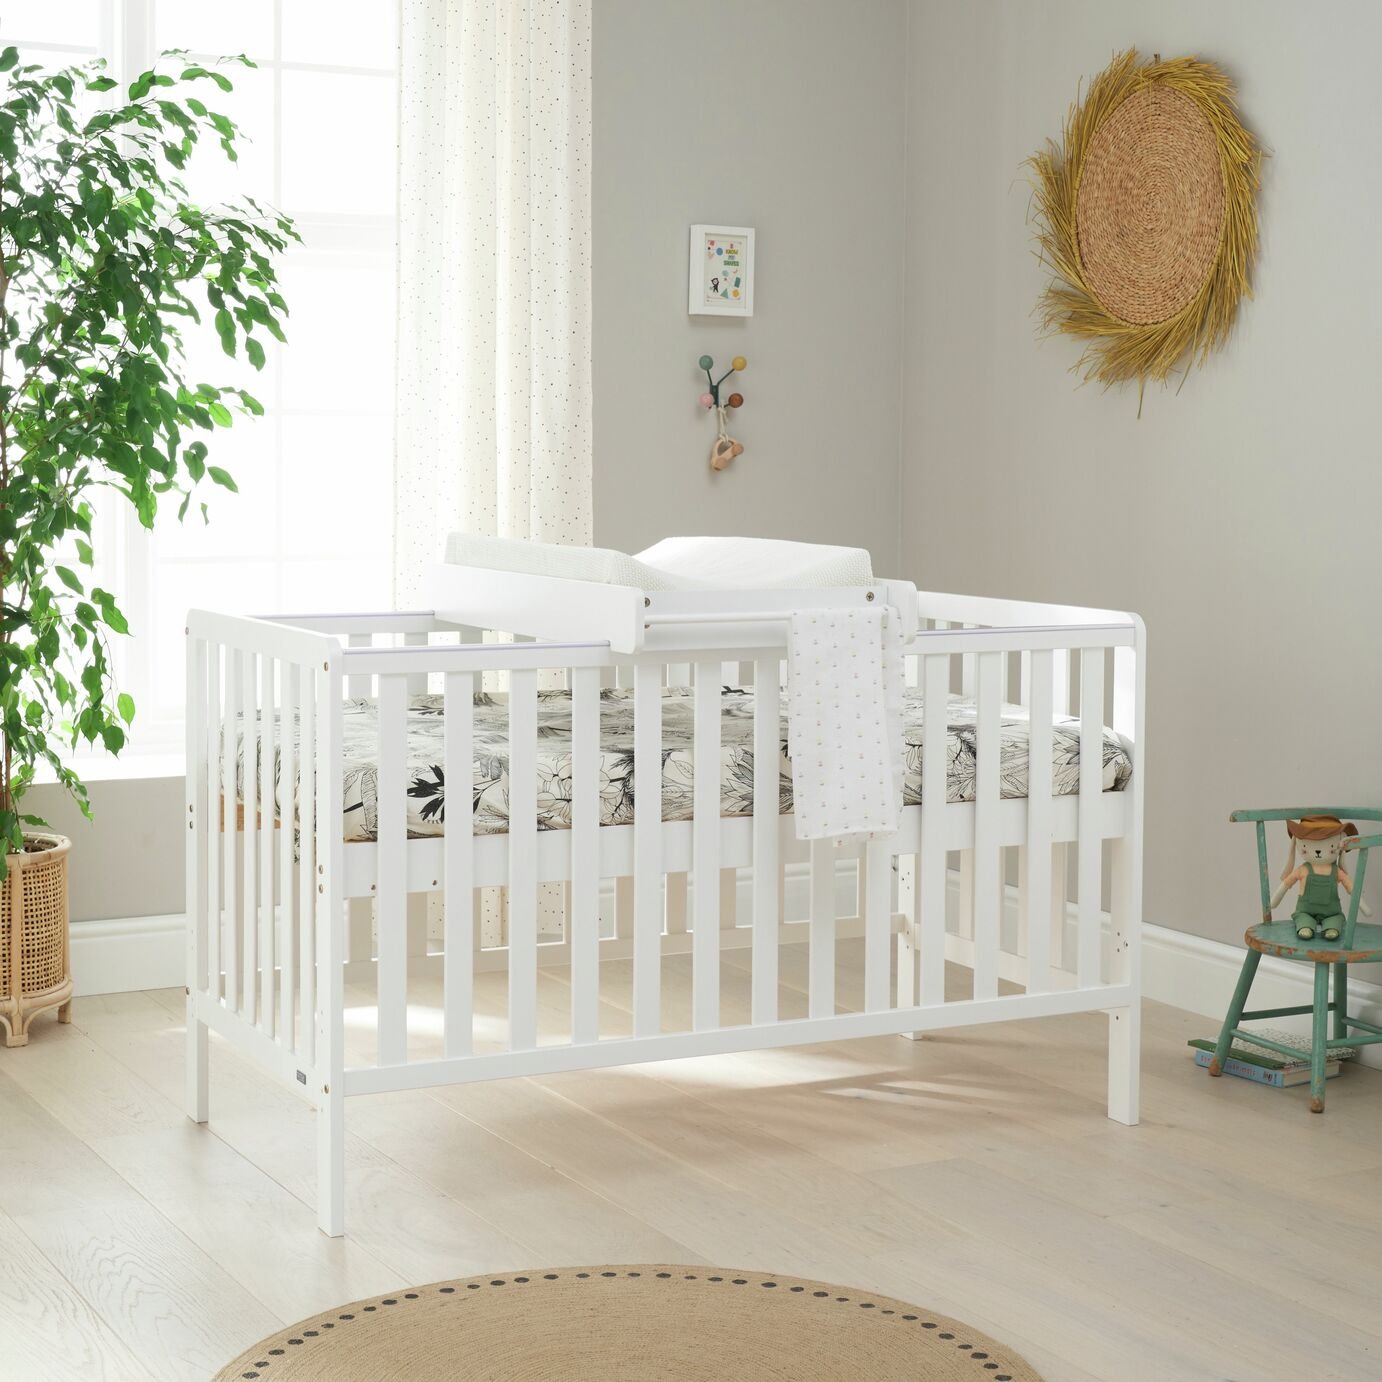 Malmo Baby Cot Bed, Cot Top Changer with Mattress Review